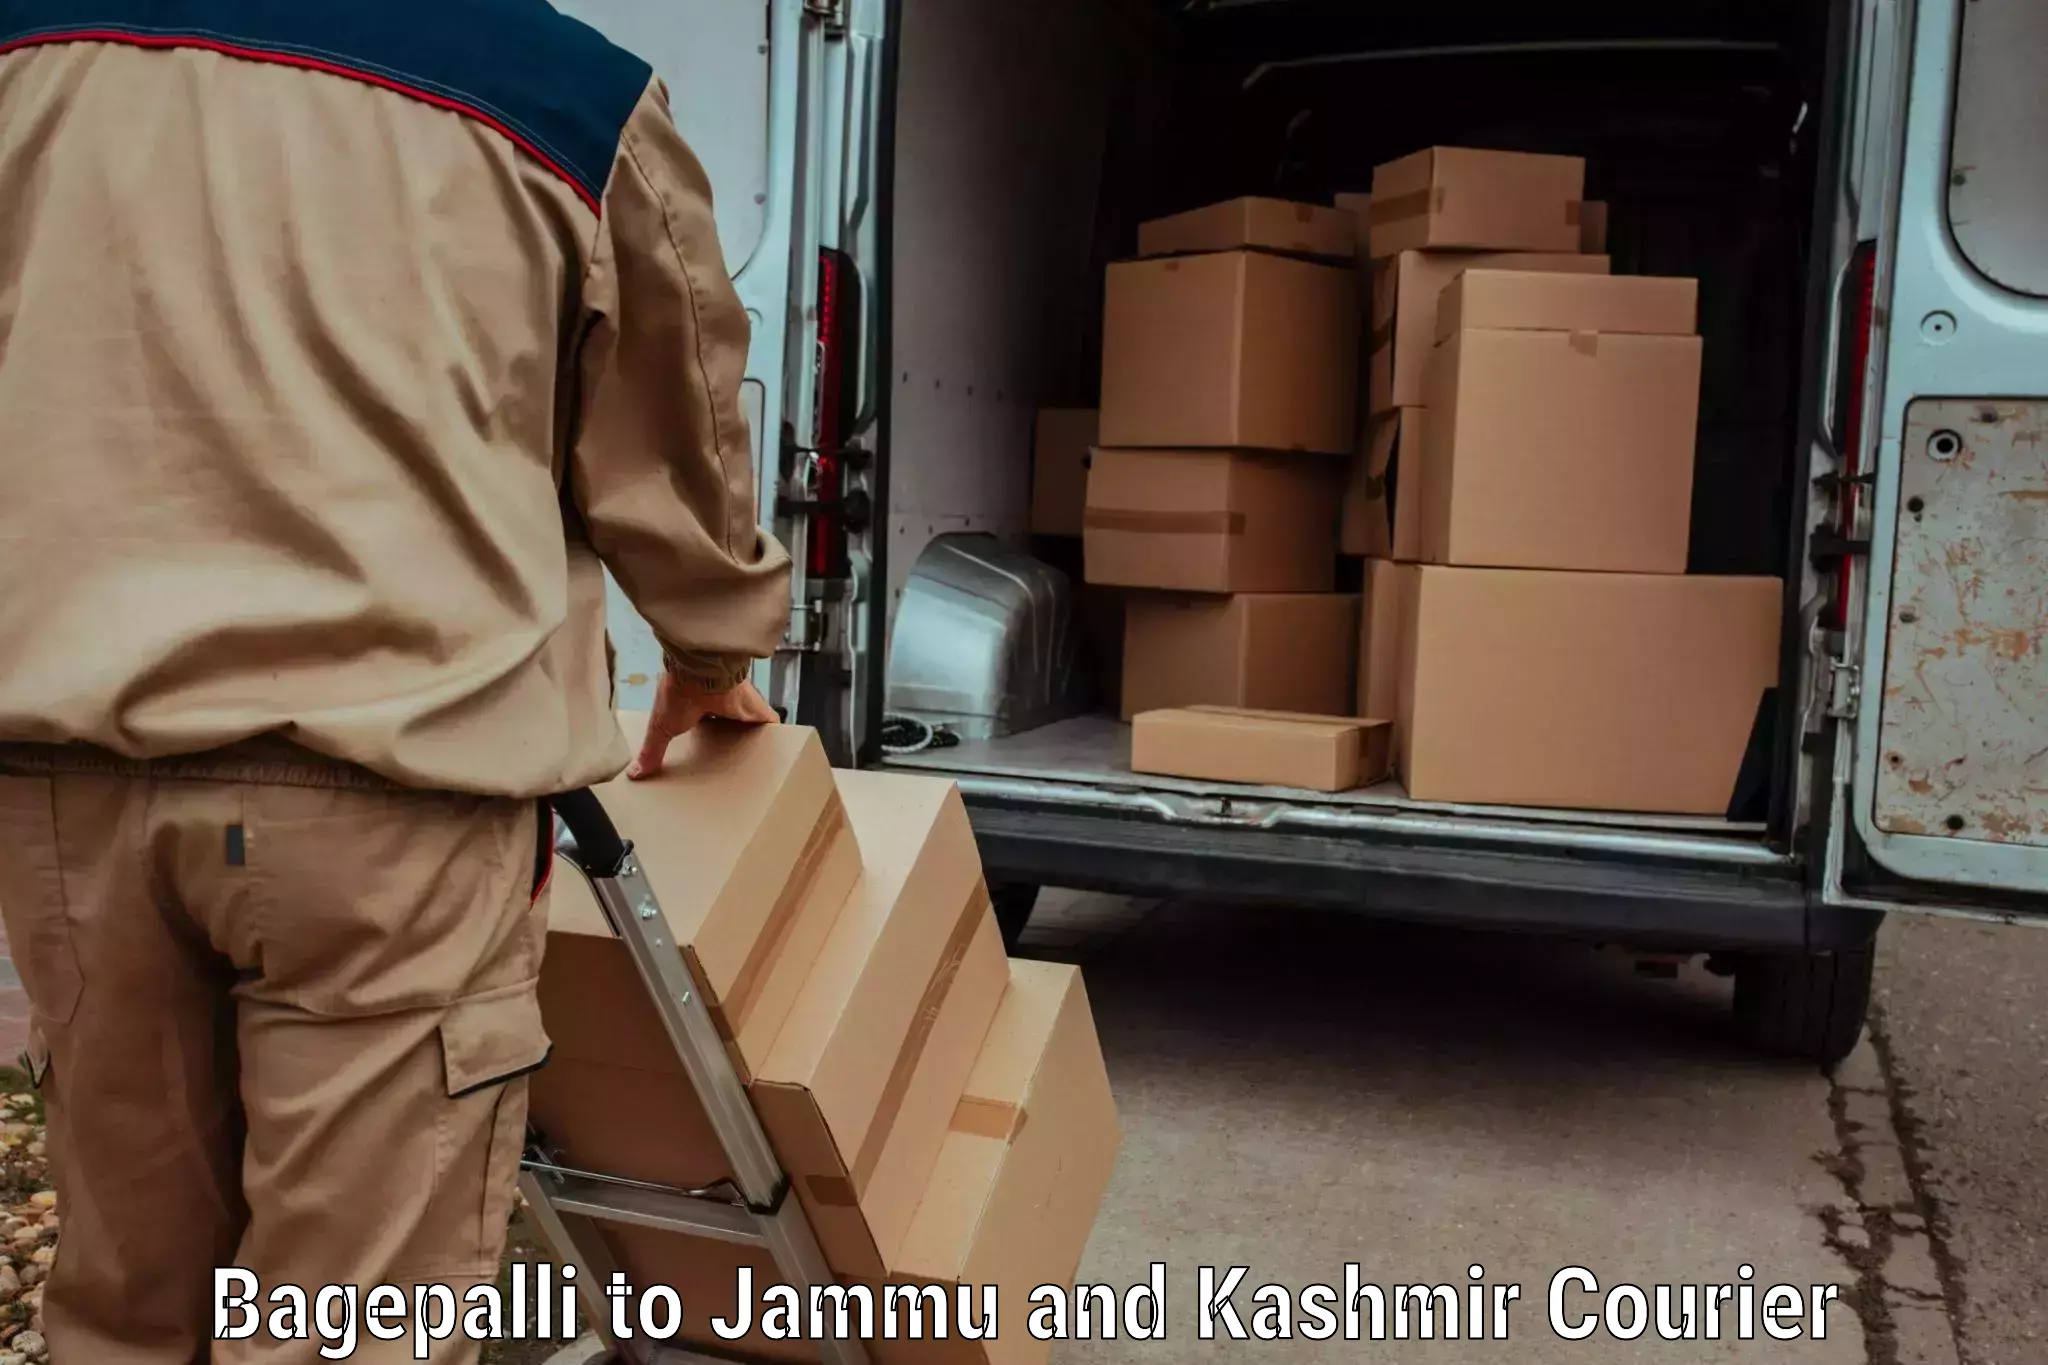 State-of-the-art courier technology Bagepalli to Budgam